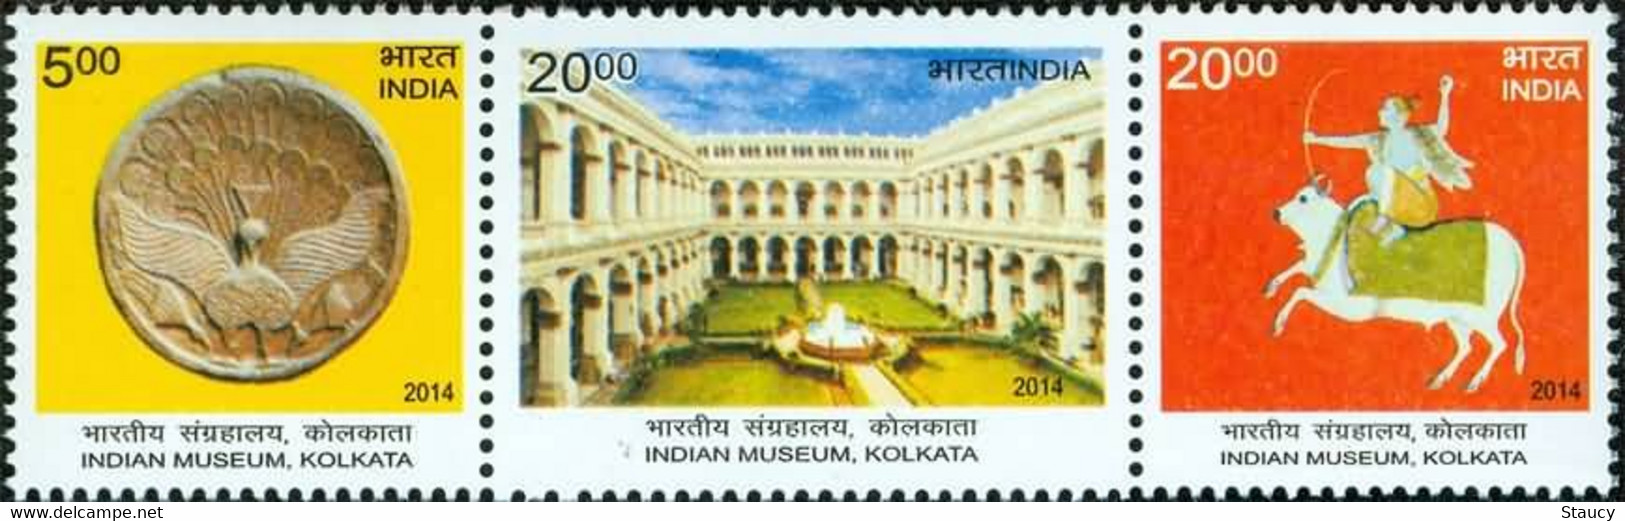 INDIA 2014 200 YEARS OF INDIAN MUSEUM KOLKATA 3v SET MNH (Archelogy, Art, Painting, History) As Per Scan - Engravings